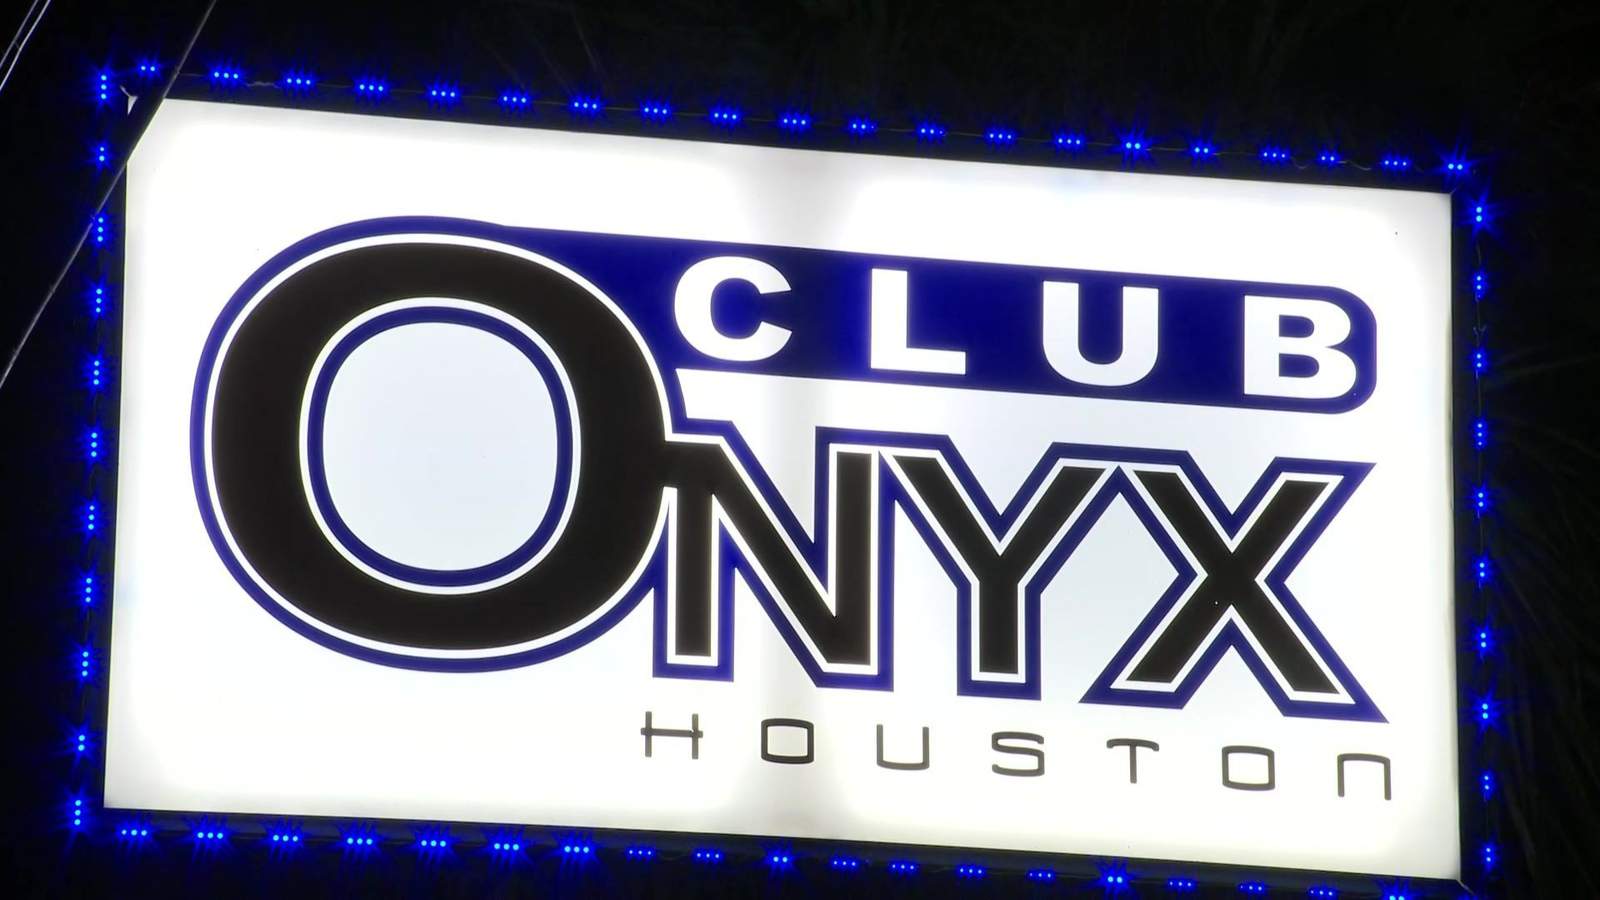 Strip club or restaurant? Club Onyx raided after opening back up to customers overnight